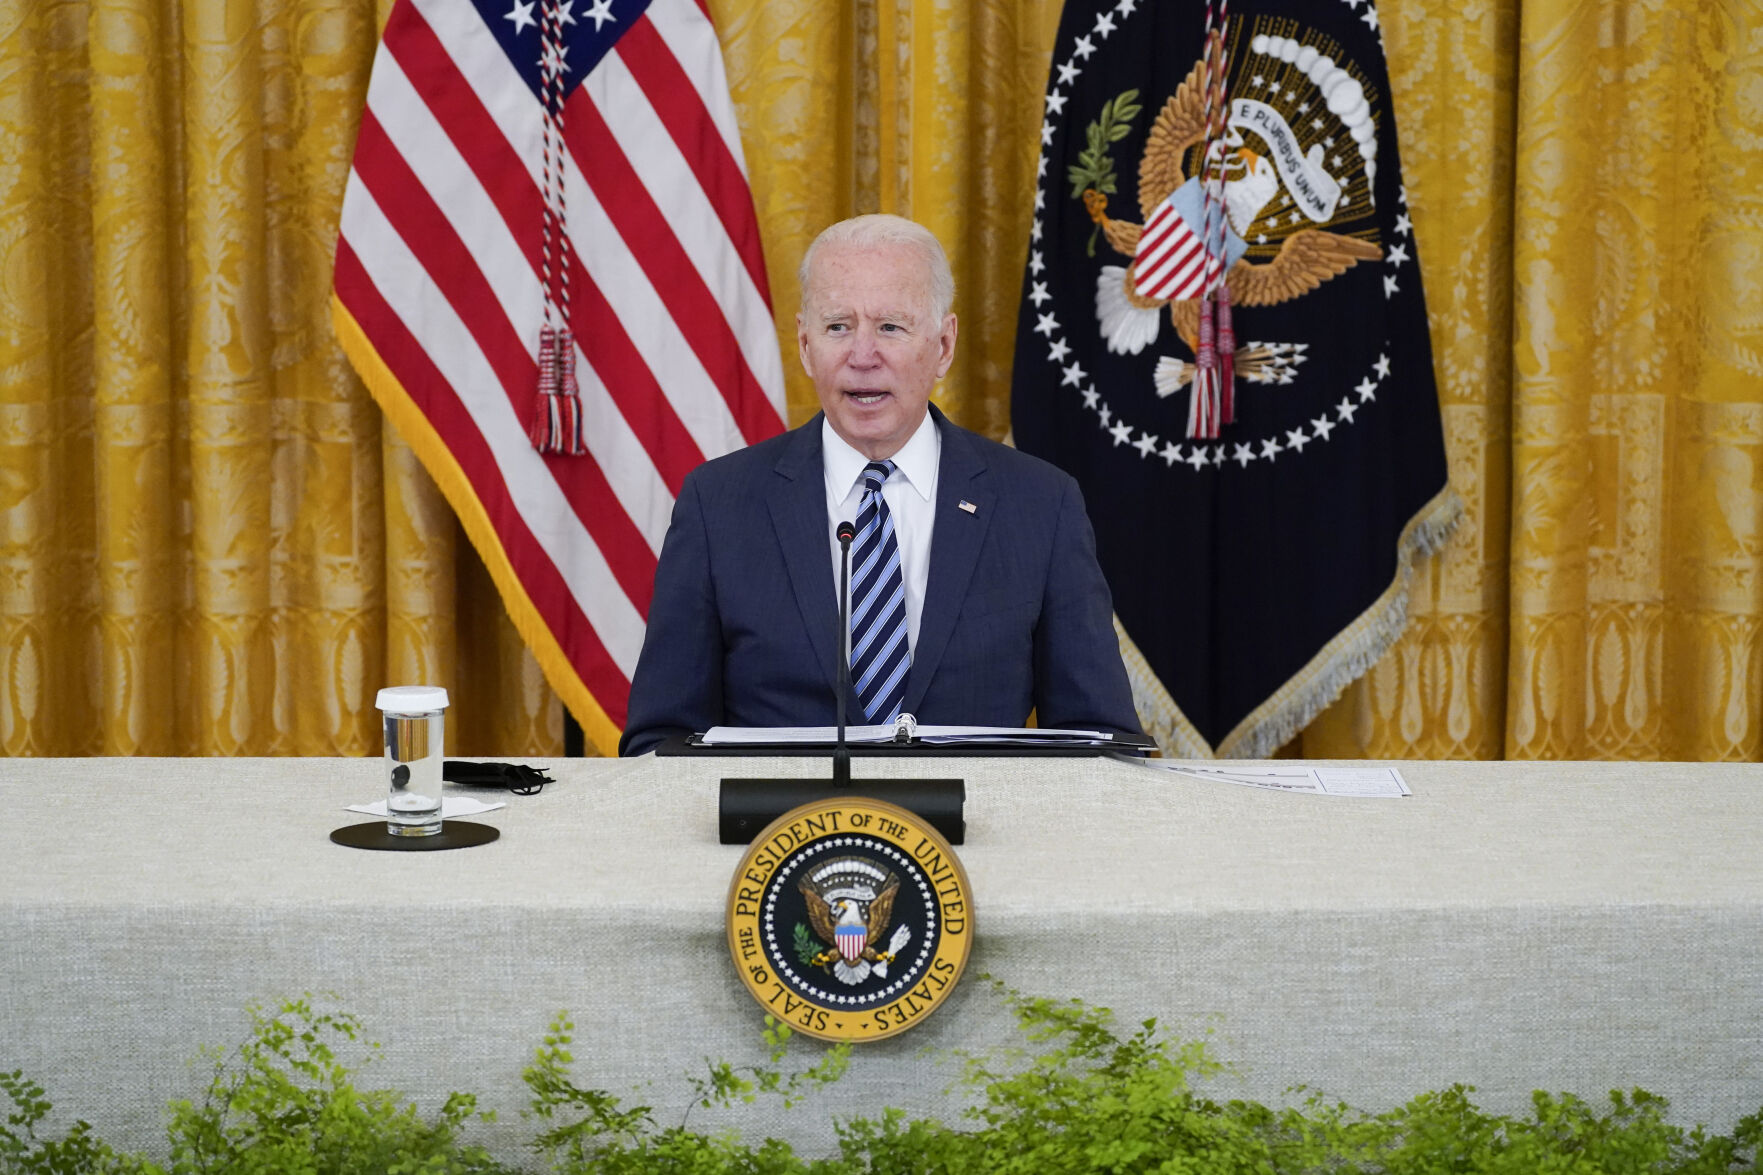 <p>FILE - President Joe Biden speaks during a meeting about cybersecurity, in the East Room of the White House, Aug. 25, 2021, in Washington. The U.S. government plans to expand minimum cybersecurity requirements for critical sectors and to be faster and more aggressive in preventing cyberattacks before they can occur, including by using military, law enforcement and diplomatic tools, according to a Biden administration strategy document.(AP Photo/Evan Vucci, File)</p>   PHOTO CREDIT: Evan Vucci 